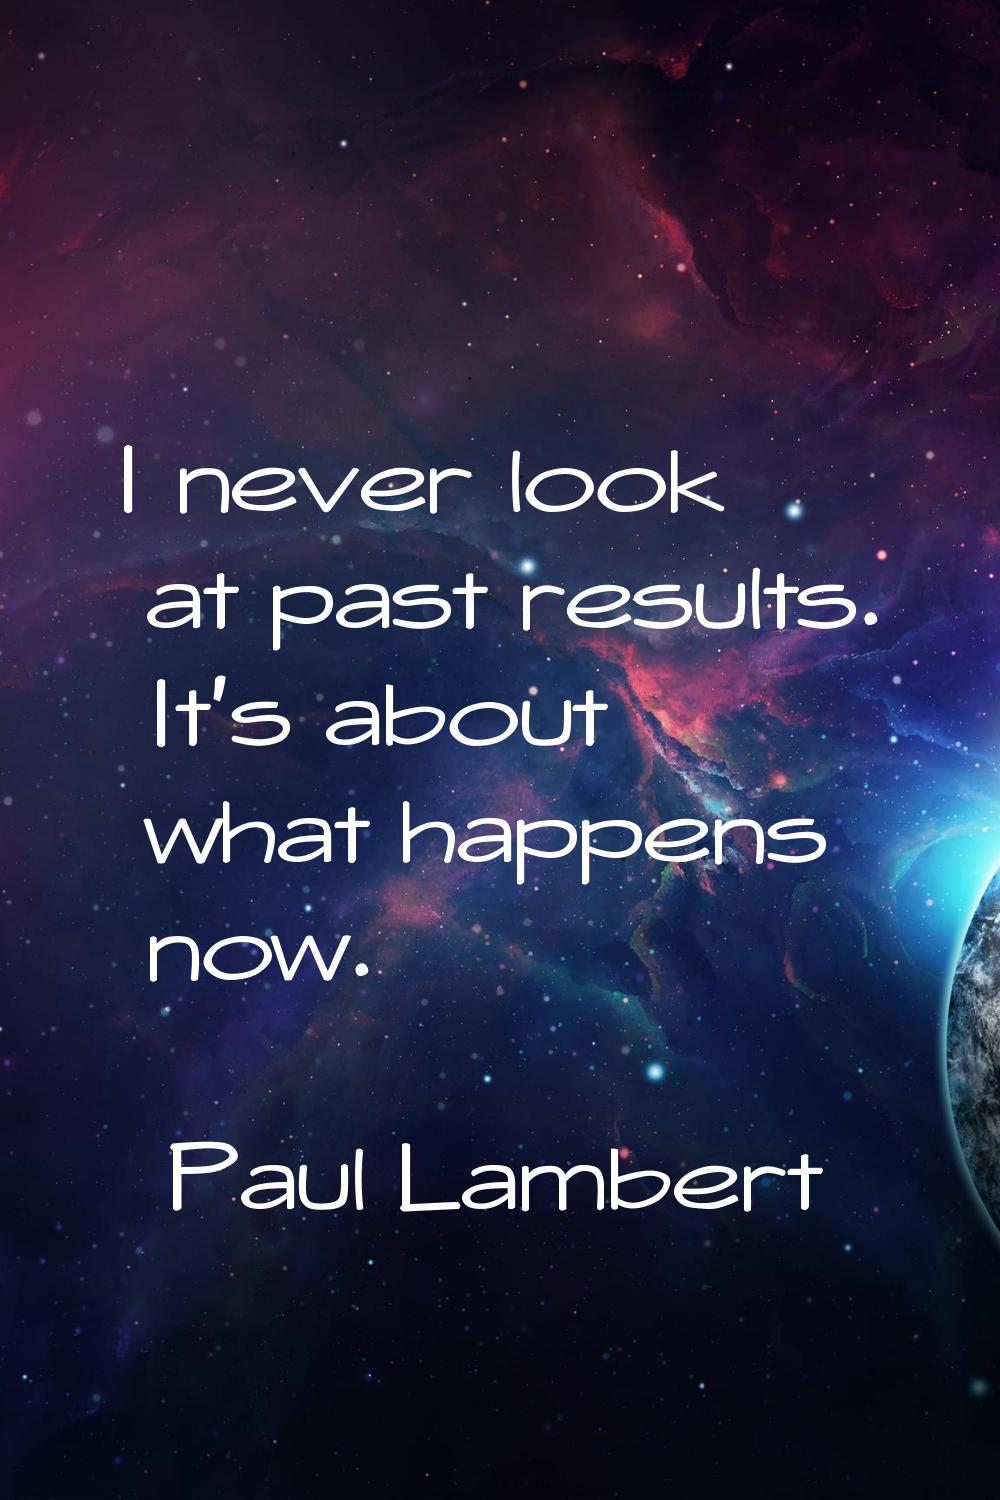 I never look at past results. It's about what happens now.